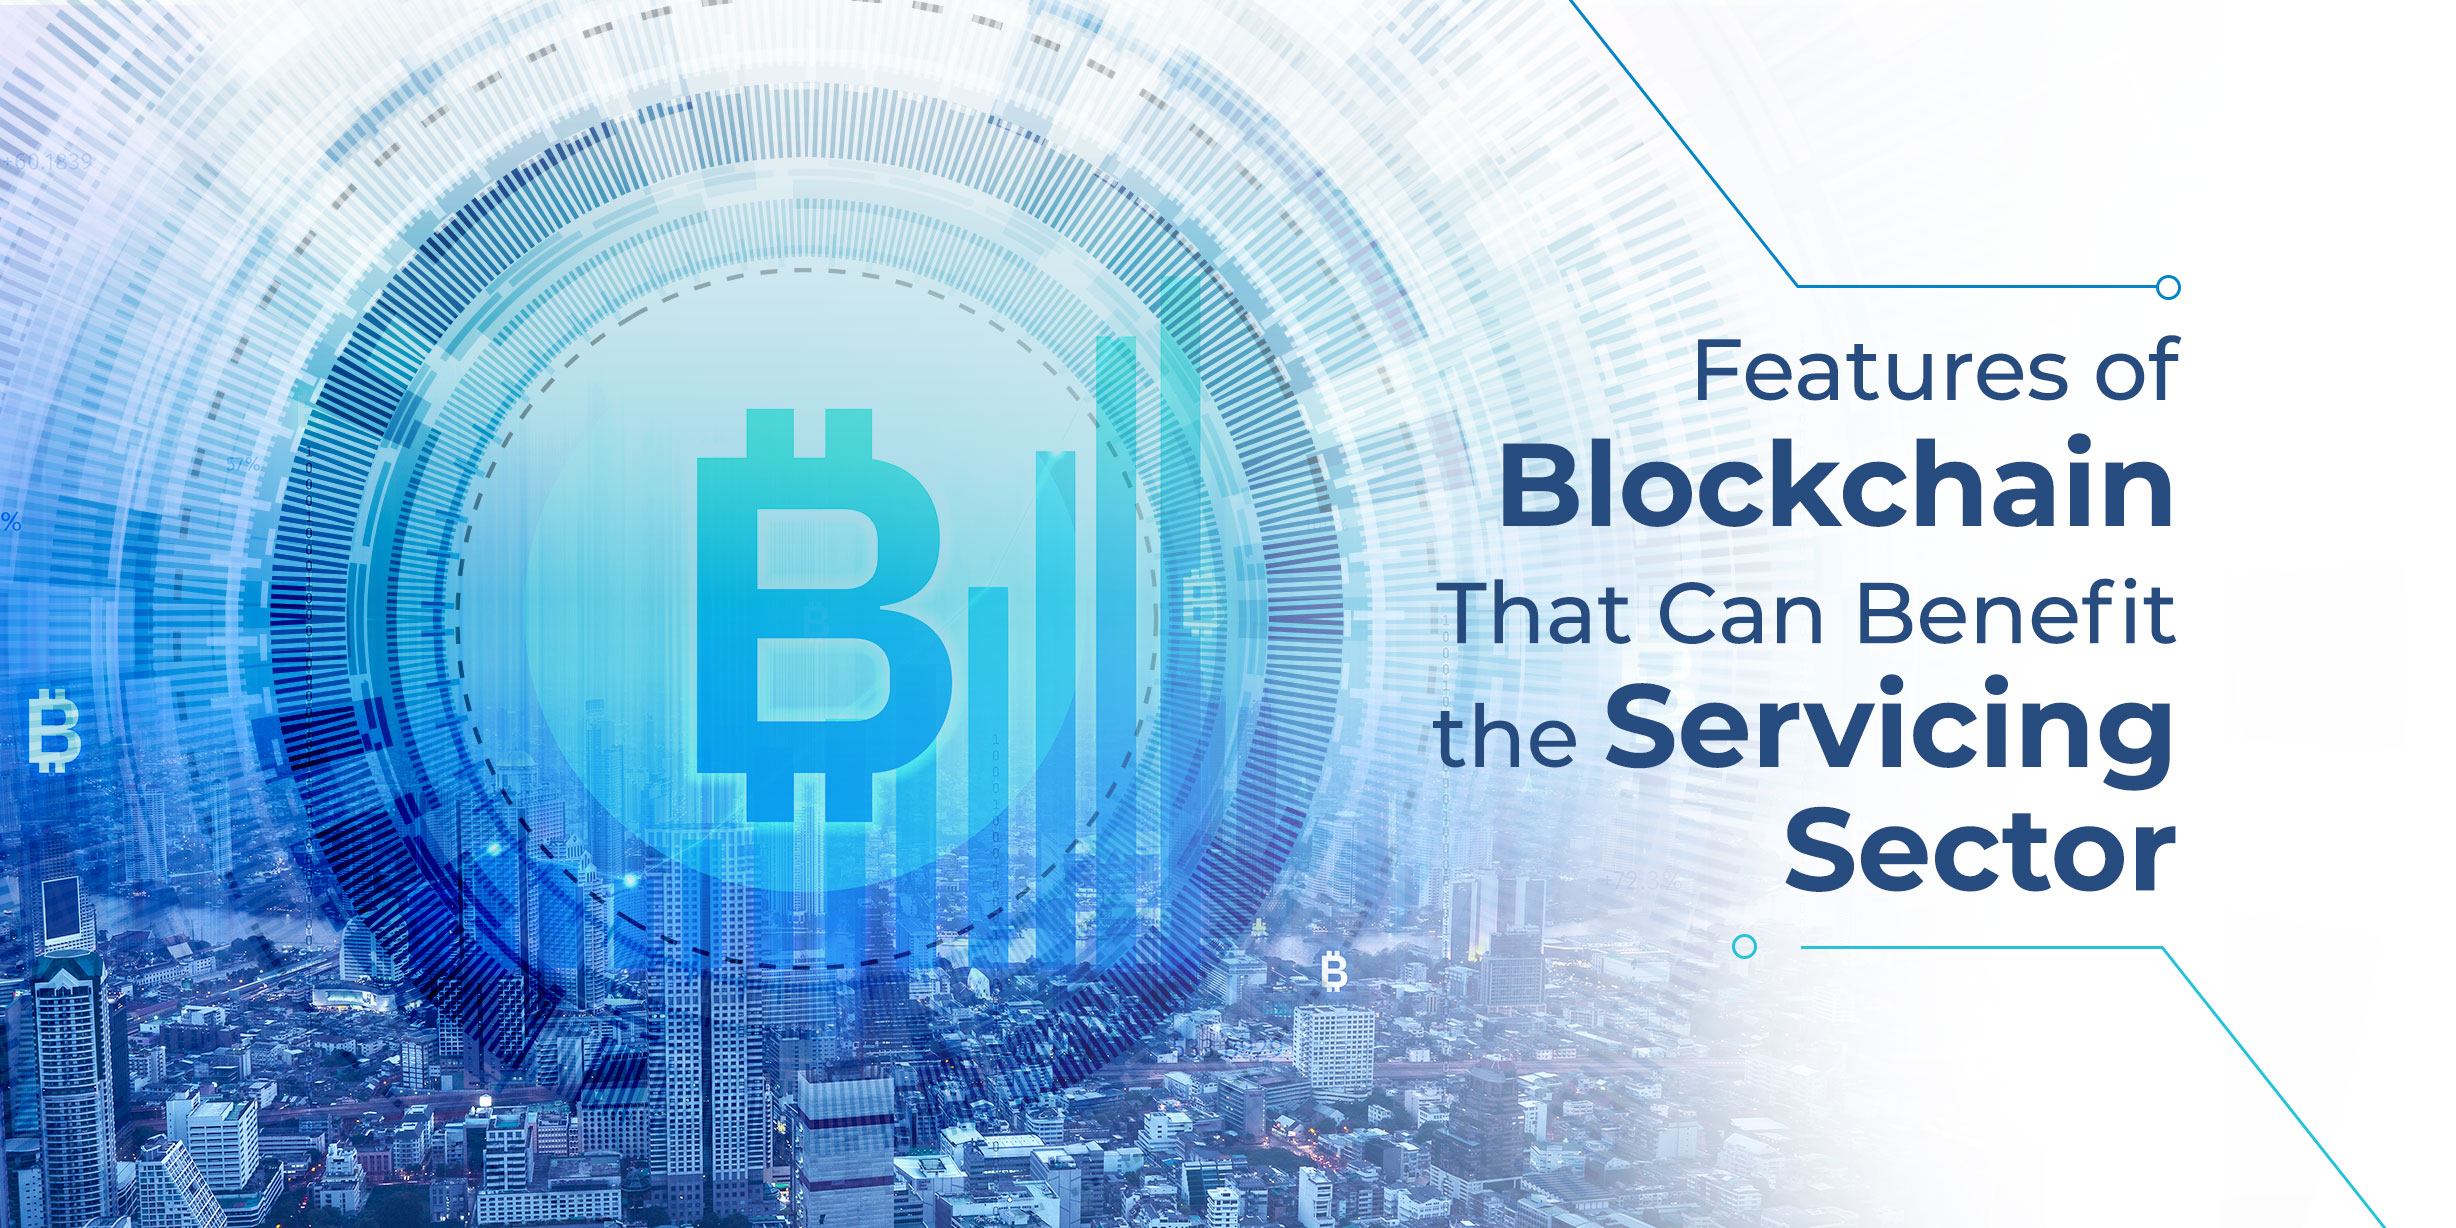 How Does Blockchain Benefit the Servicing Sector?